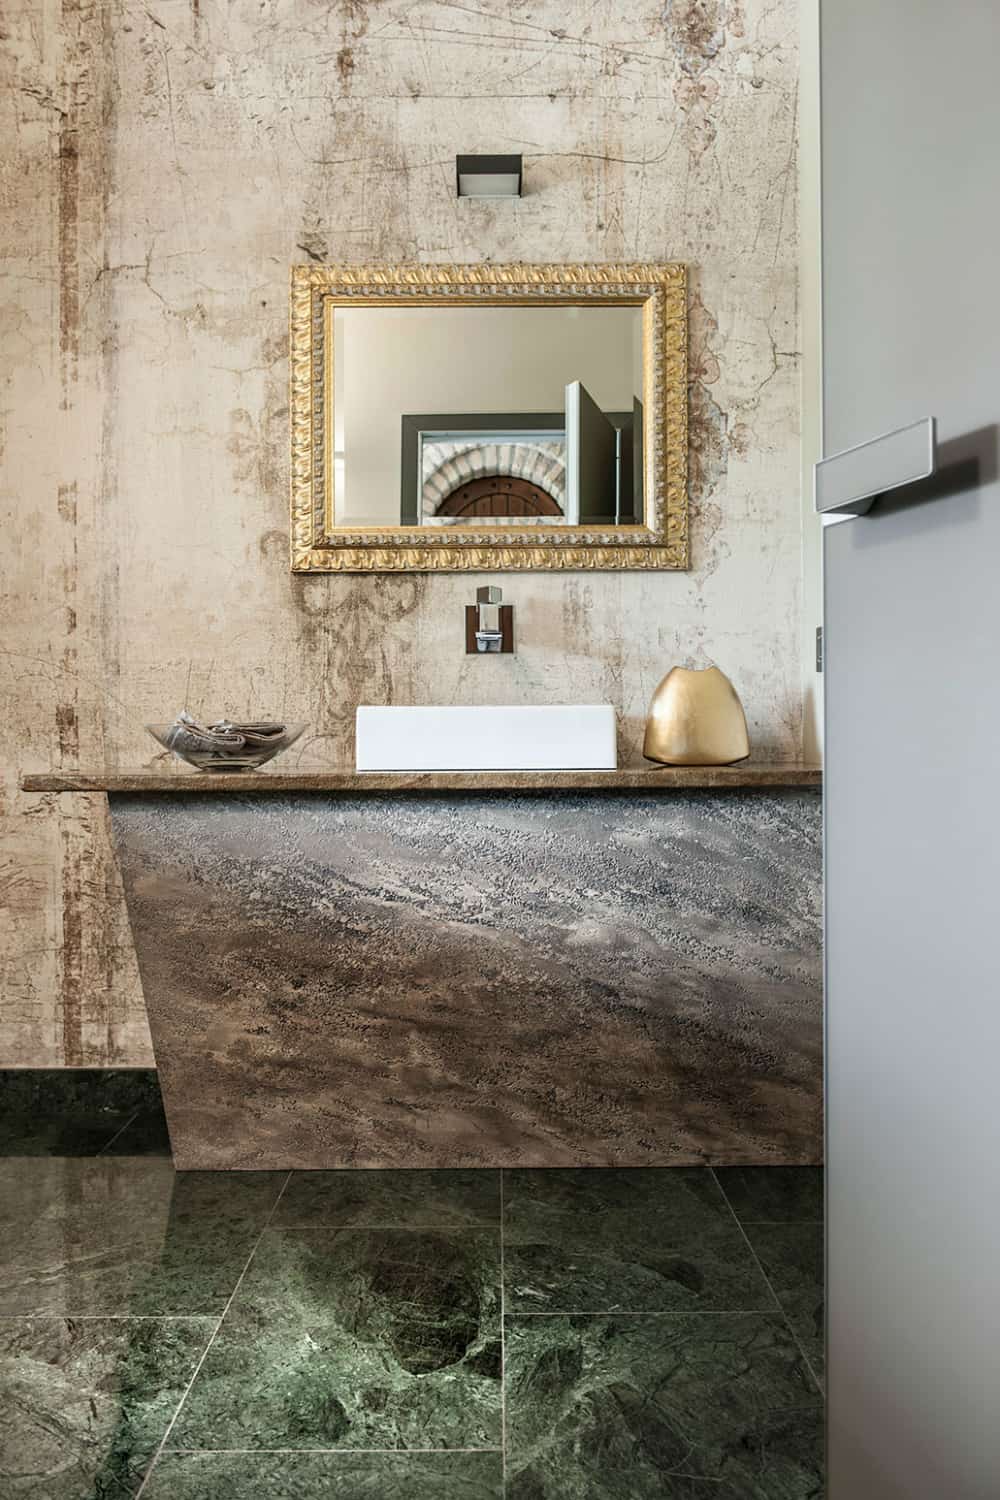 Golden accents work well with the textured stone surfaces